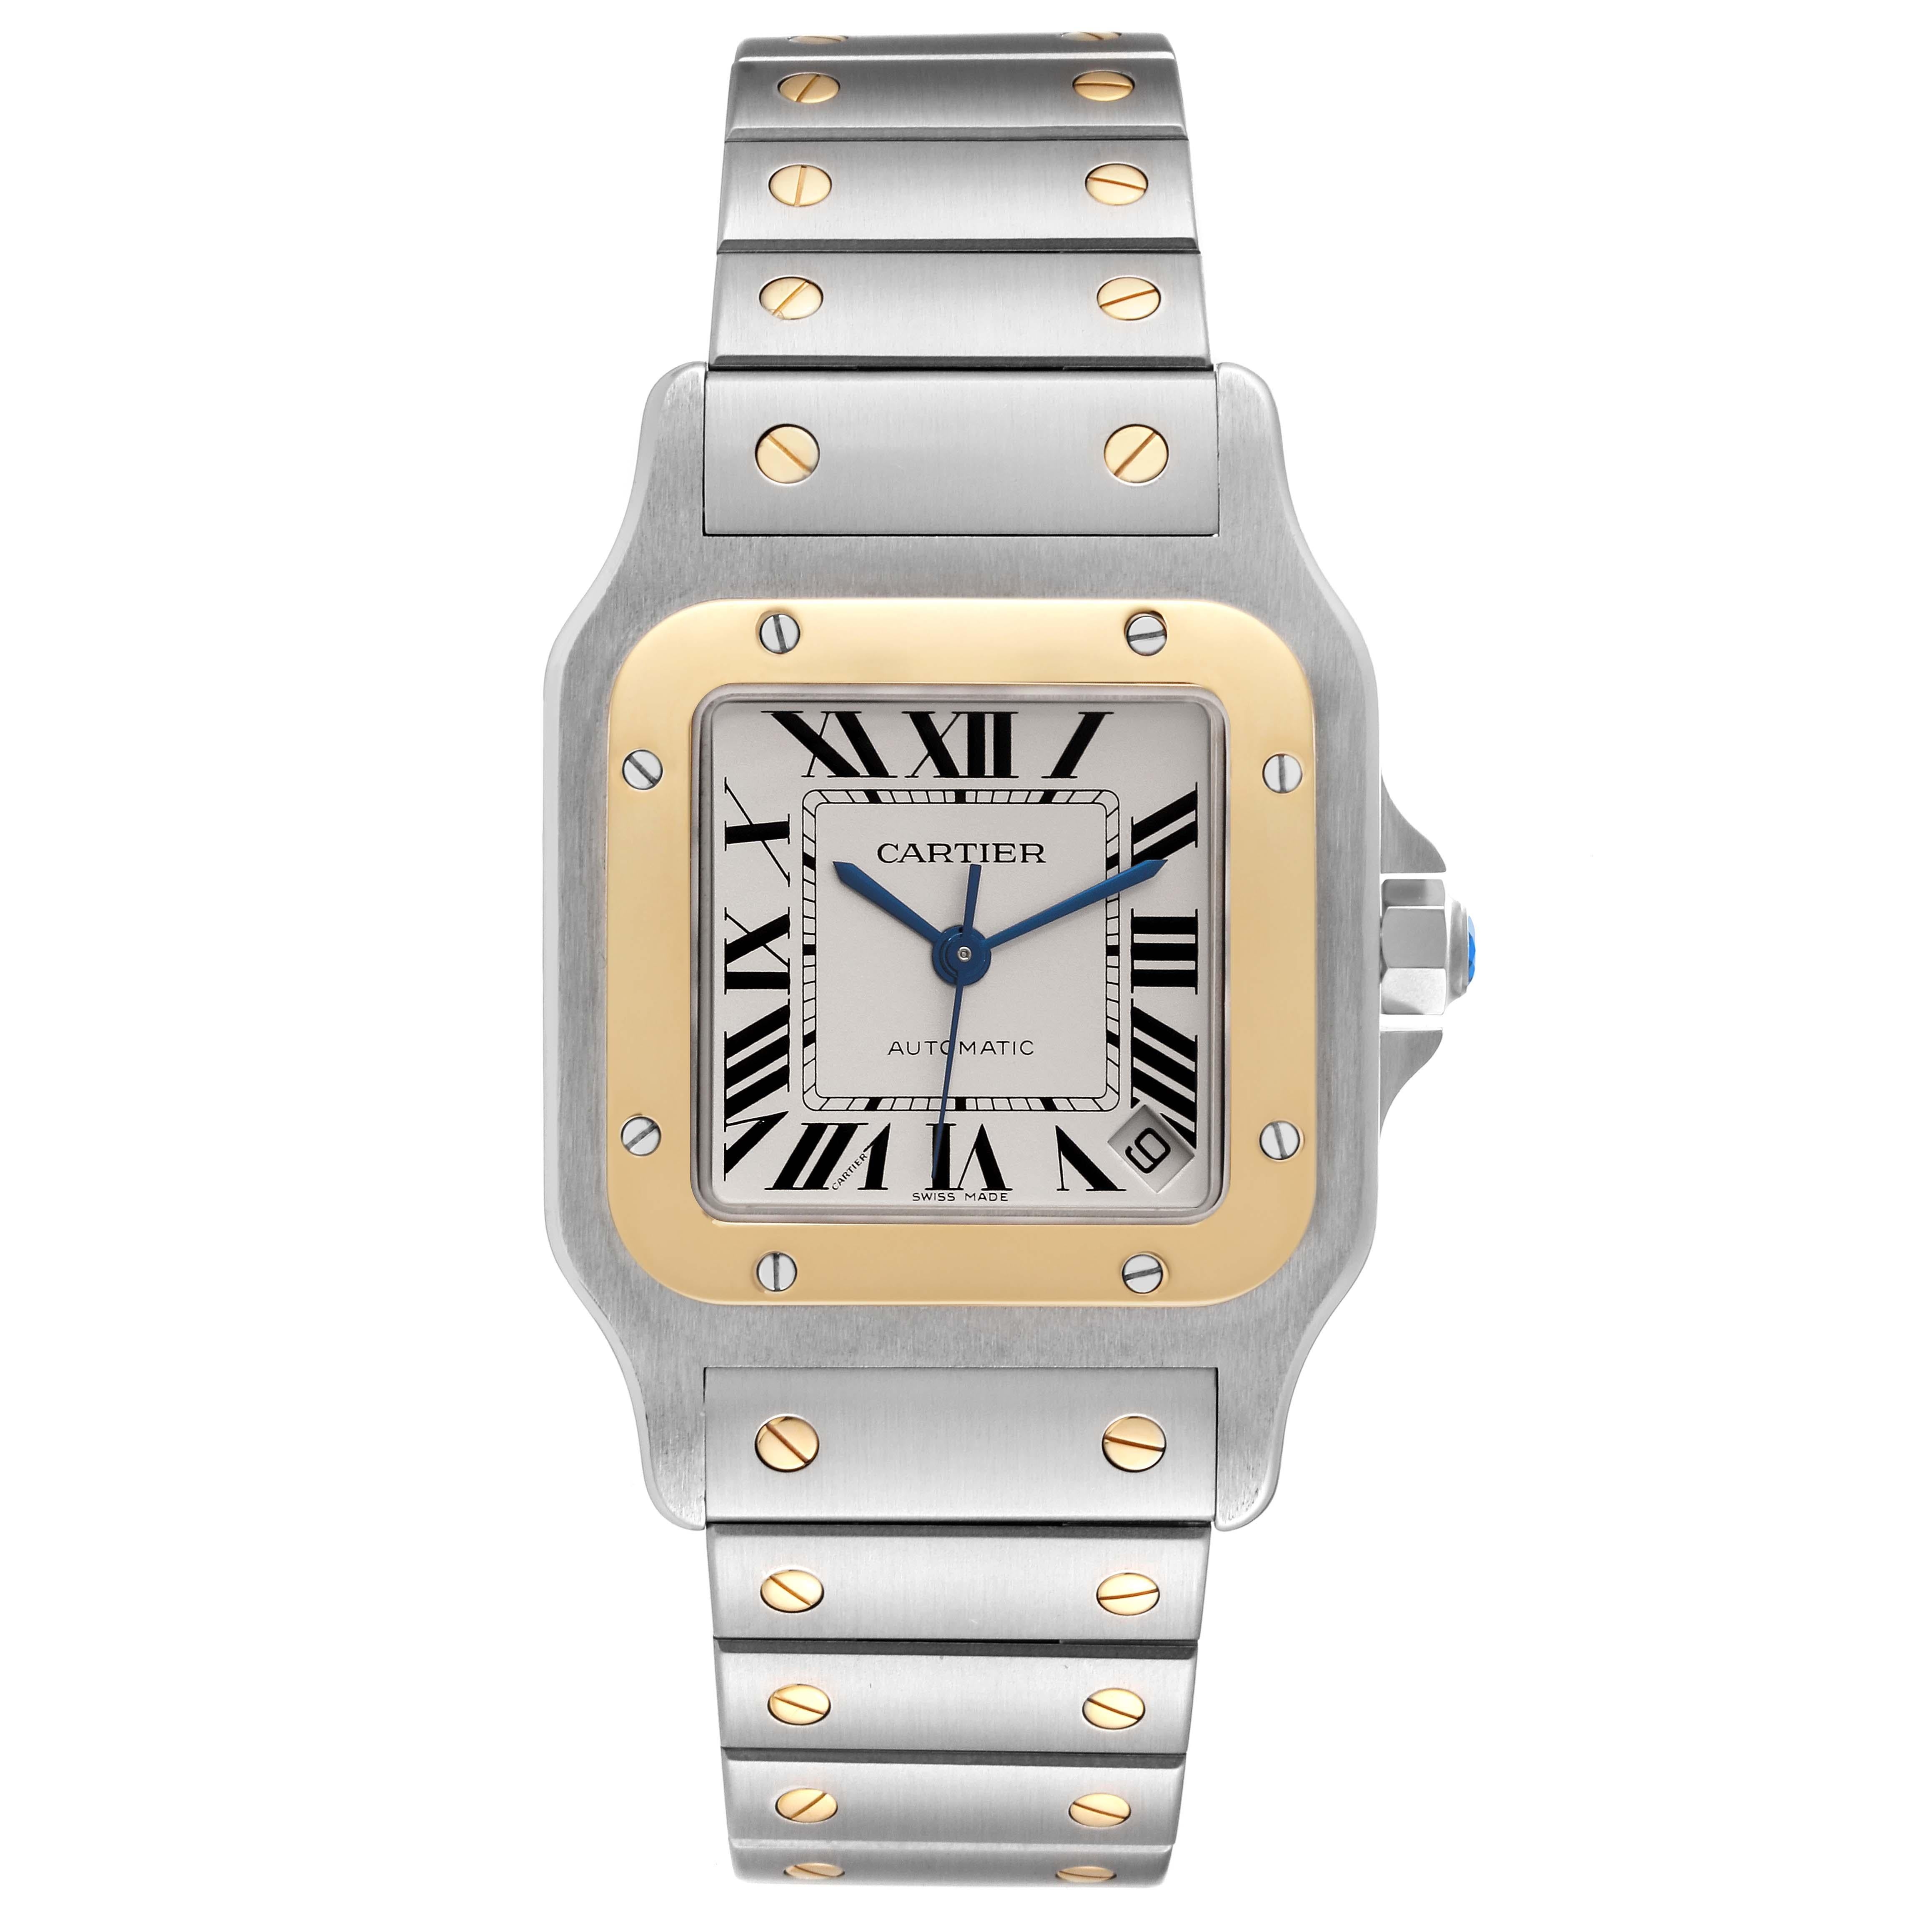 Cartier Santos Galbee XL Steel Yellow Gold Mens Watch W20099C4. Automatic self-winding movement, Caliber 049. Brushed and polished stainless steel case 32 X 45 mm. Stainless steel protected octagonal crown set with a faceted blue spinel cabochon.